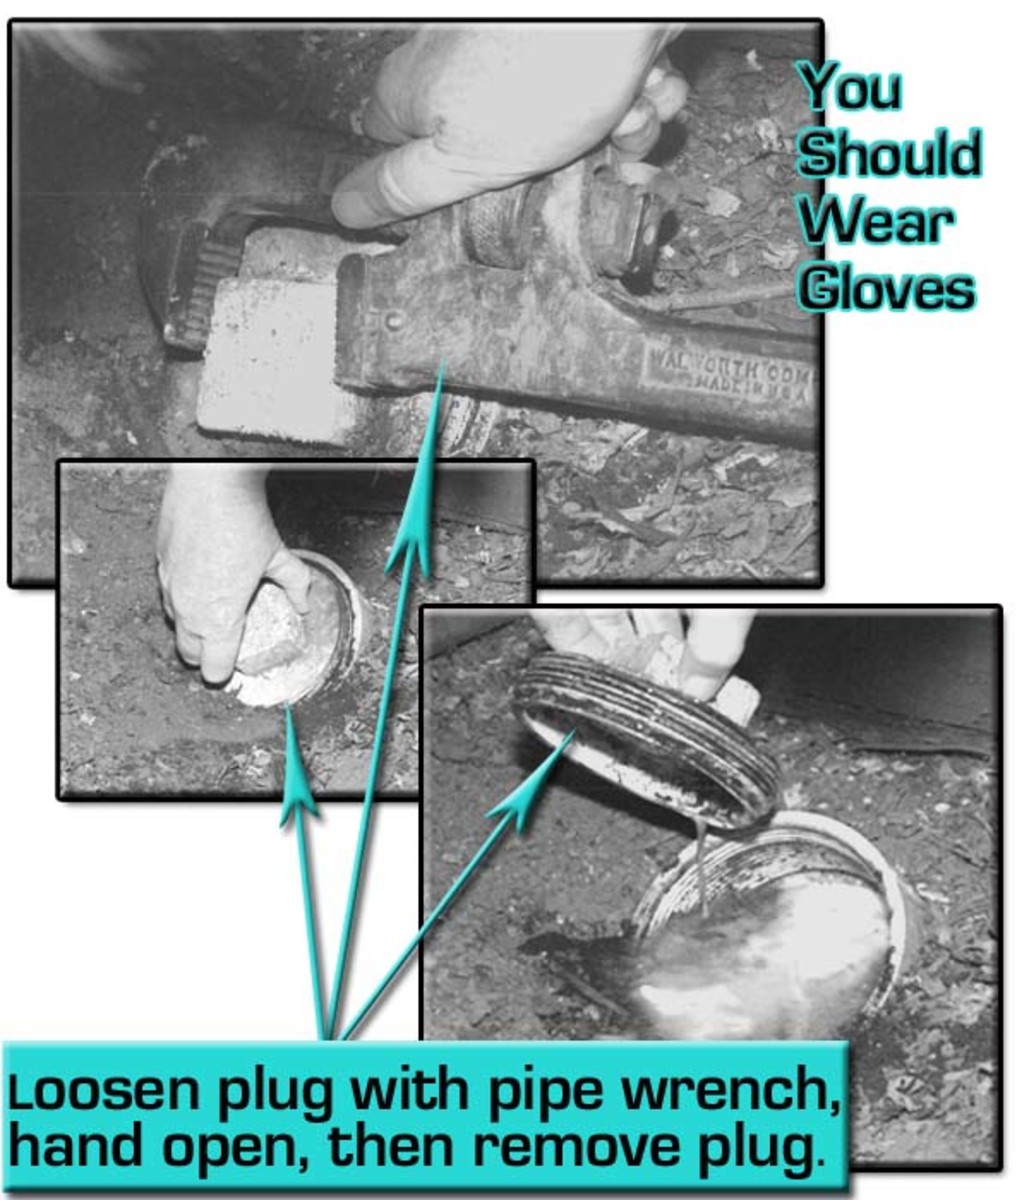 Loosen the plug with wrench, hand unscrew plud, remove plug. WEAR GLOVES!